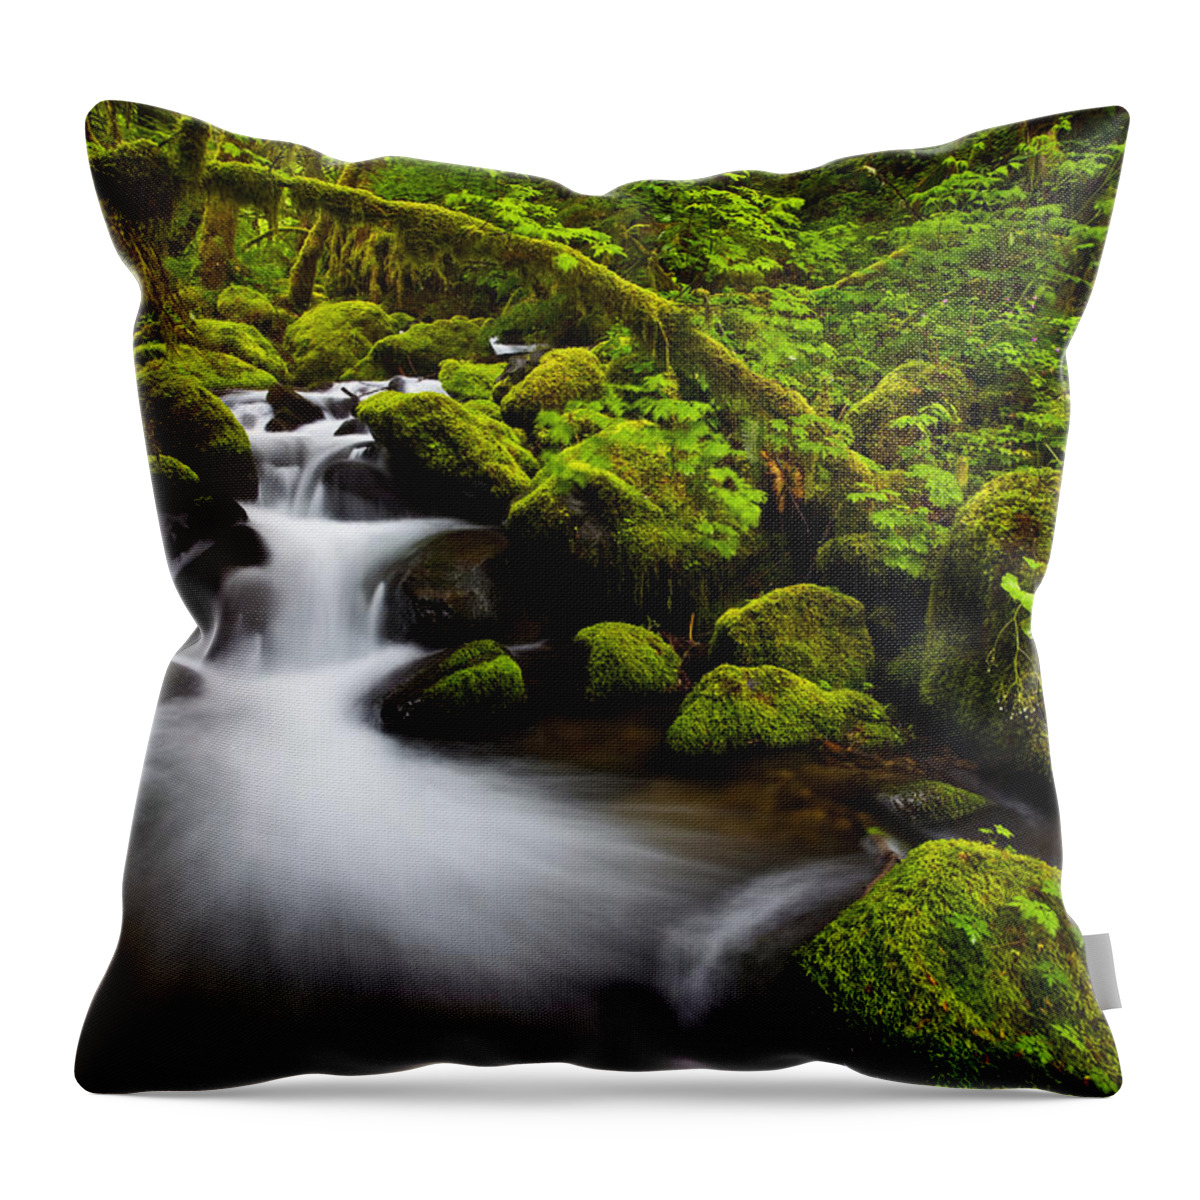 Lush Throw Pillow featuring the photograph Mossy Arch Cascade by Darren White